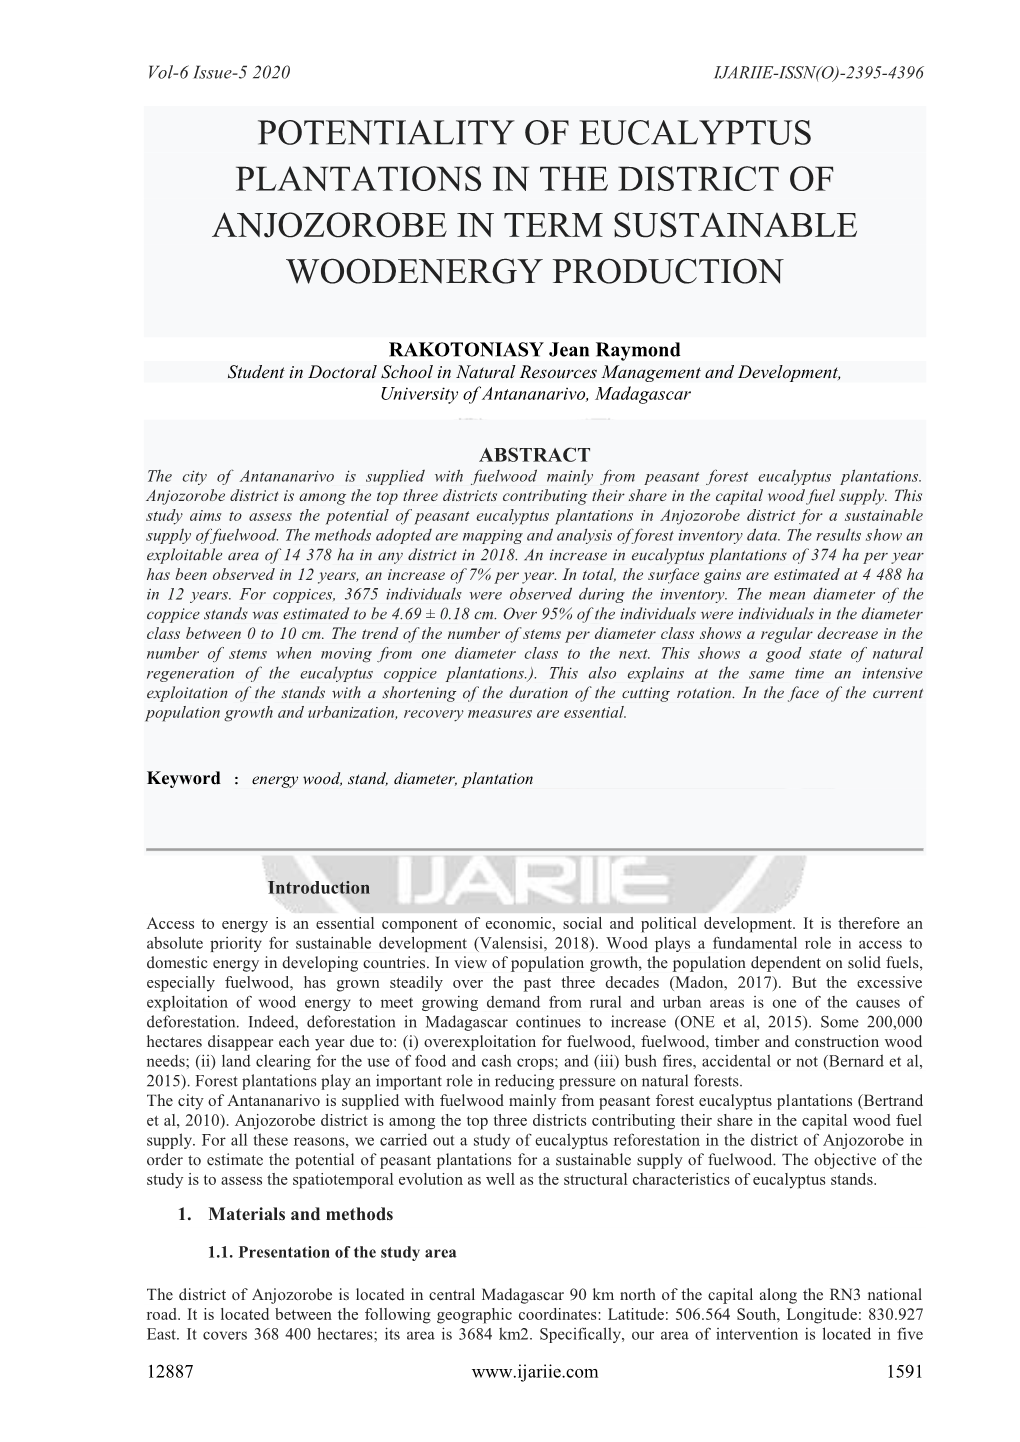 Potentiality of Eucalyptus Plantations in the District of Anjozorobe in Term Sustainable Woodenergy Production